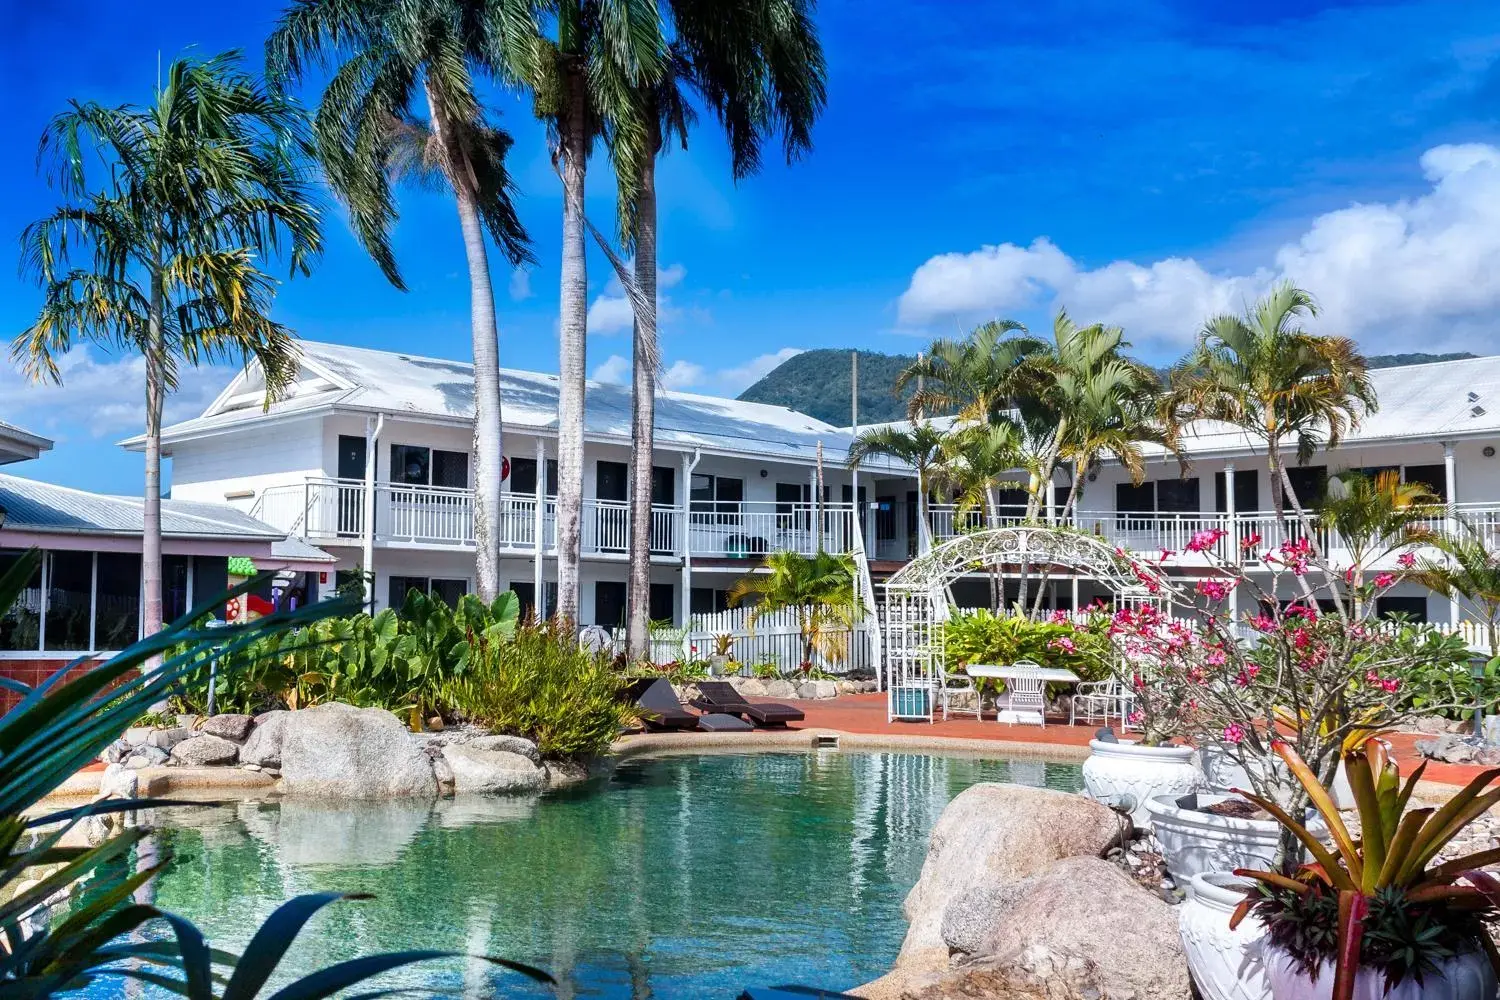 Property building, Swimming Pool in South Cairns Resort